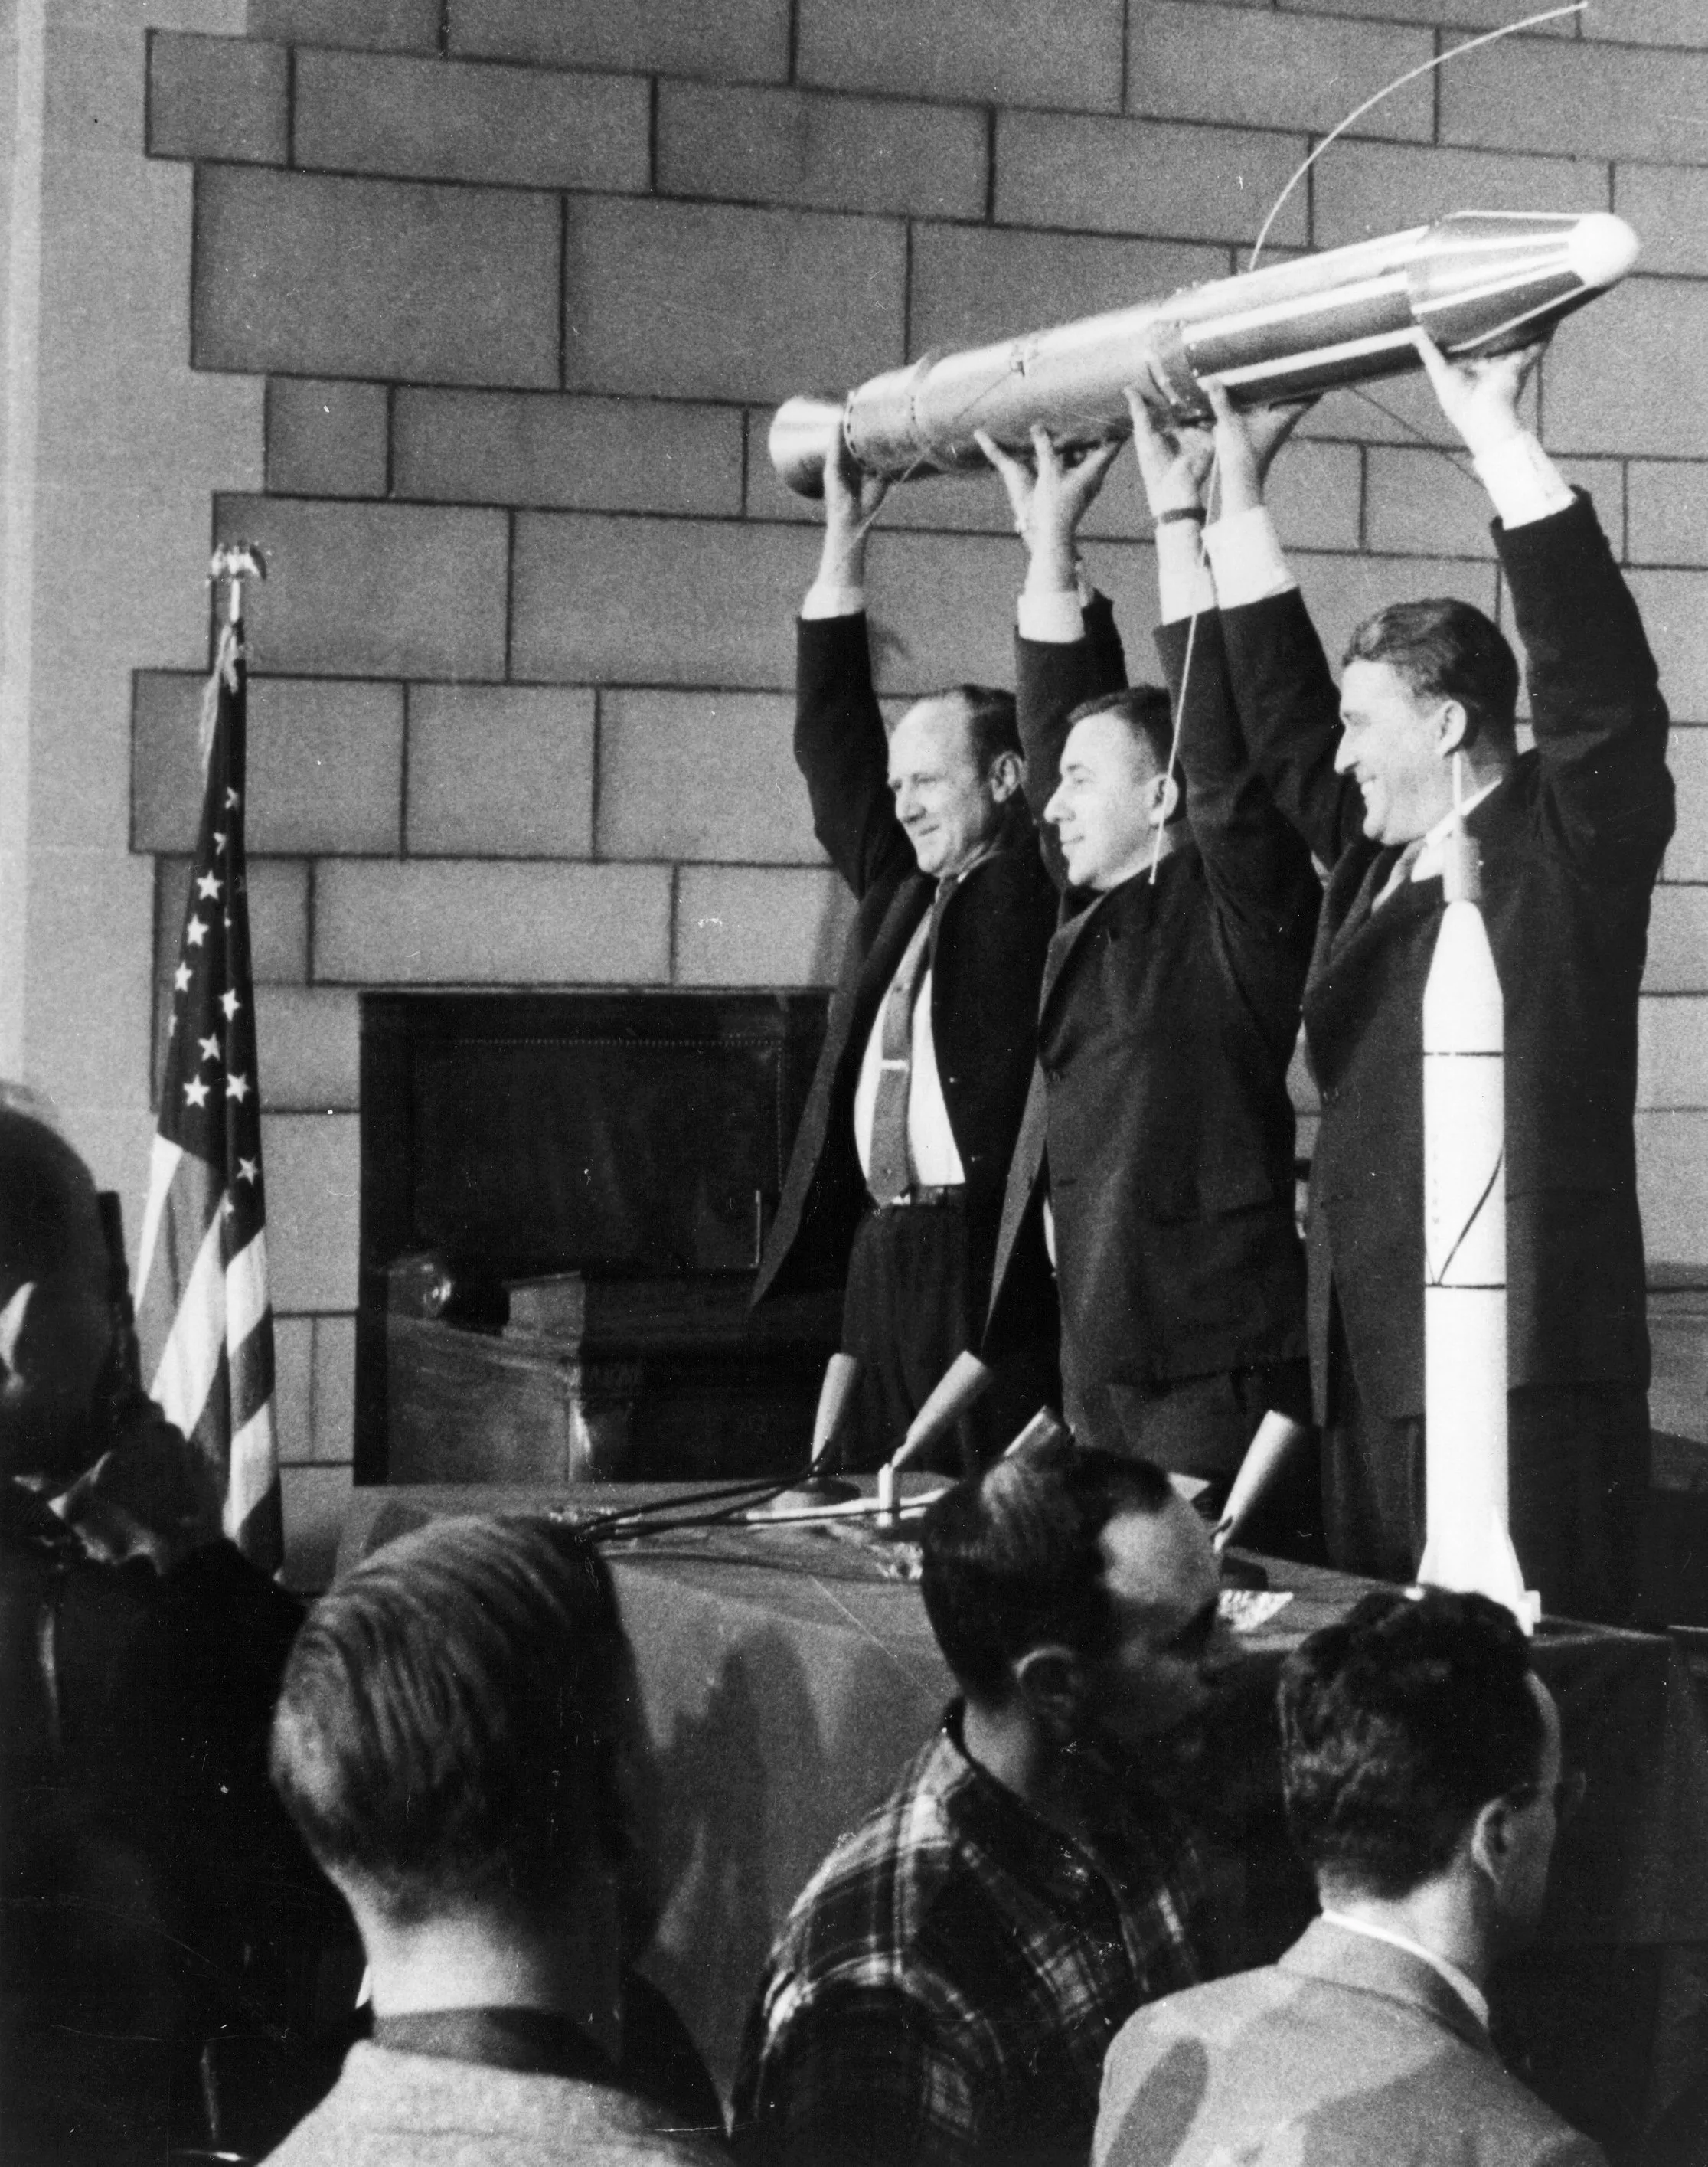 Three men in front of an audience in a black-and-white photo from 1958, dressed in suits and holding up a small rocket. 